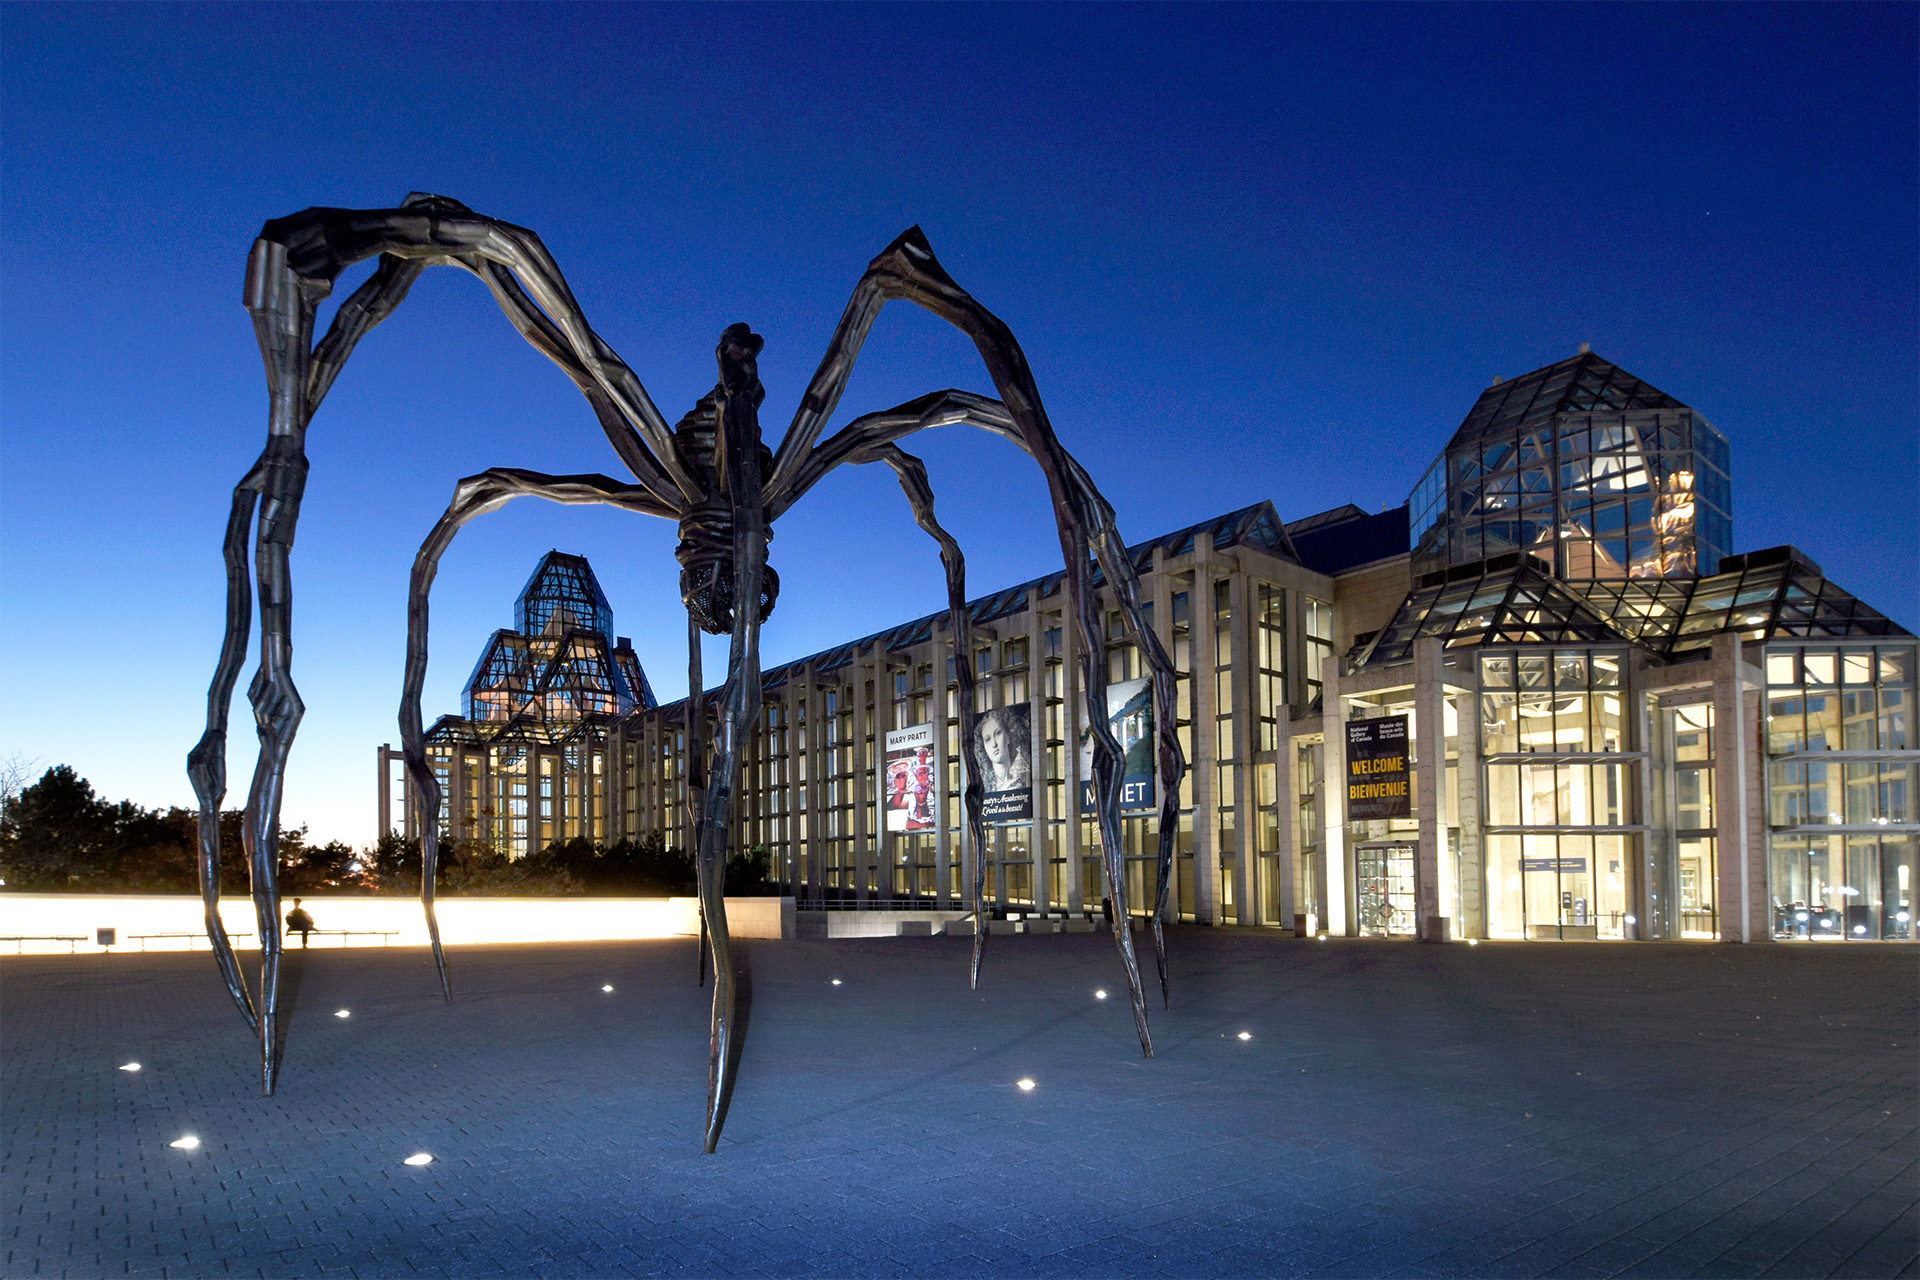 The image features the exterior of the National Gallery of Canada at dusk with a large spider sculpture in the foreground and the gallery's modern glass and stone architecture illuminated in the background